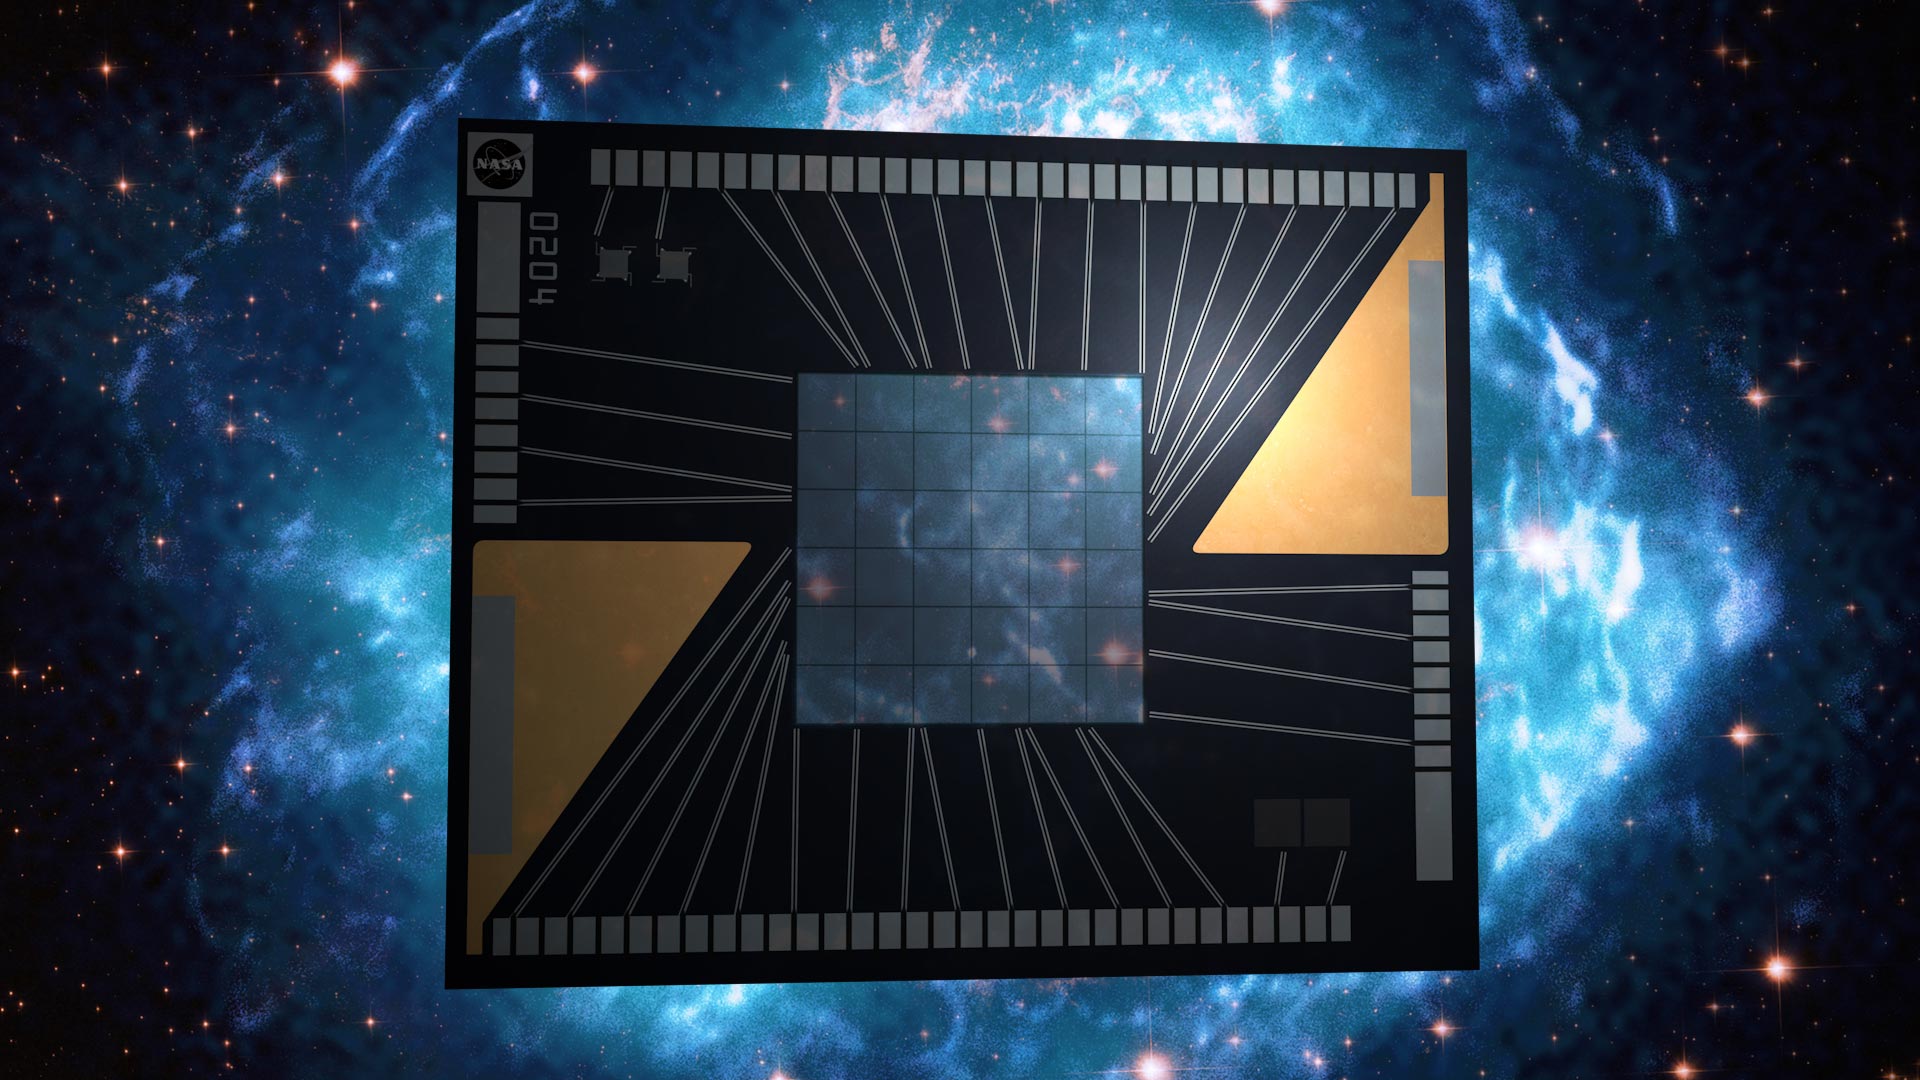 XRISM Unravels Astrophysical Mysteries With Just 36 Pixels [Video]